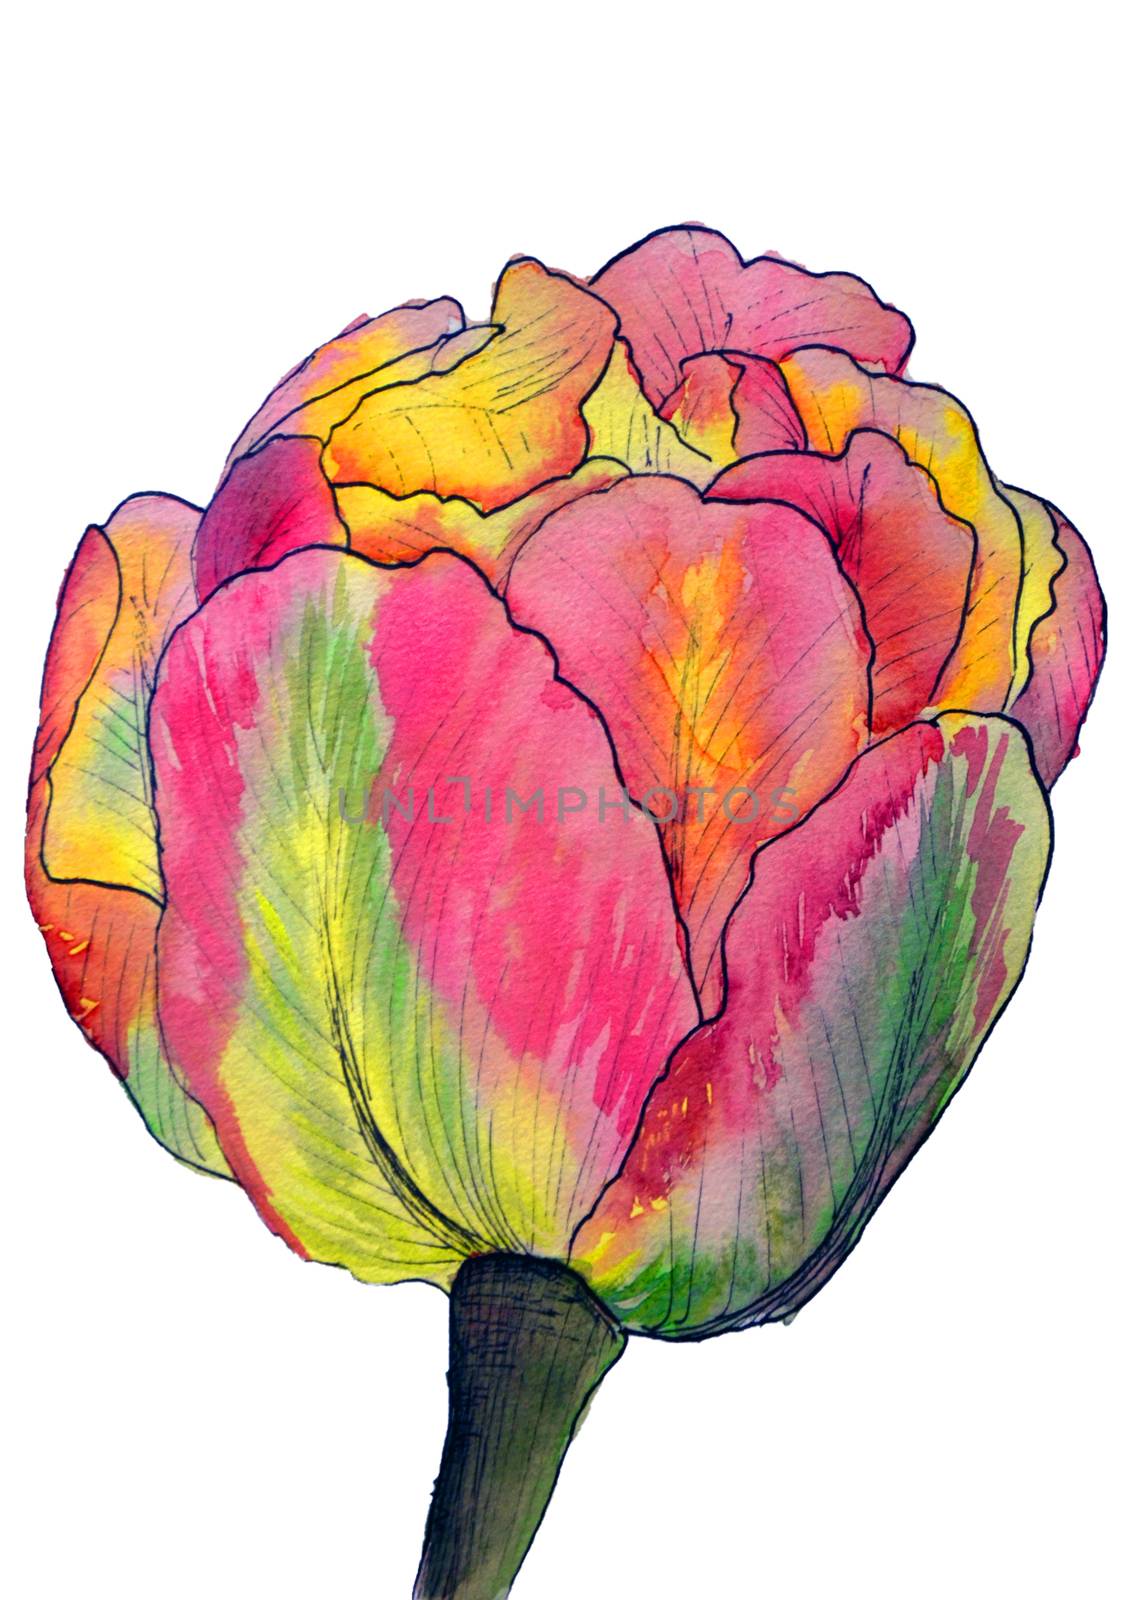 Watercolor magic flower tulip isolated on the white background.Flower of love.Pink,rose,violet,purple,red petals by kimbo-bo